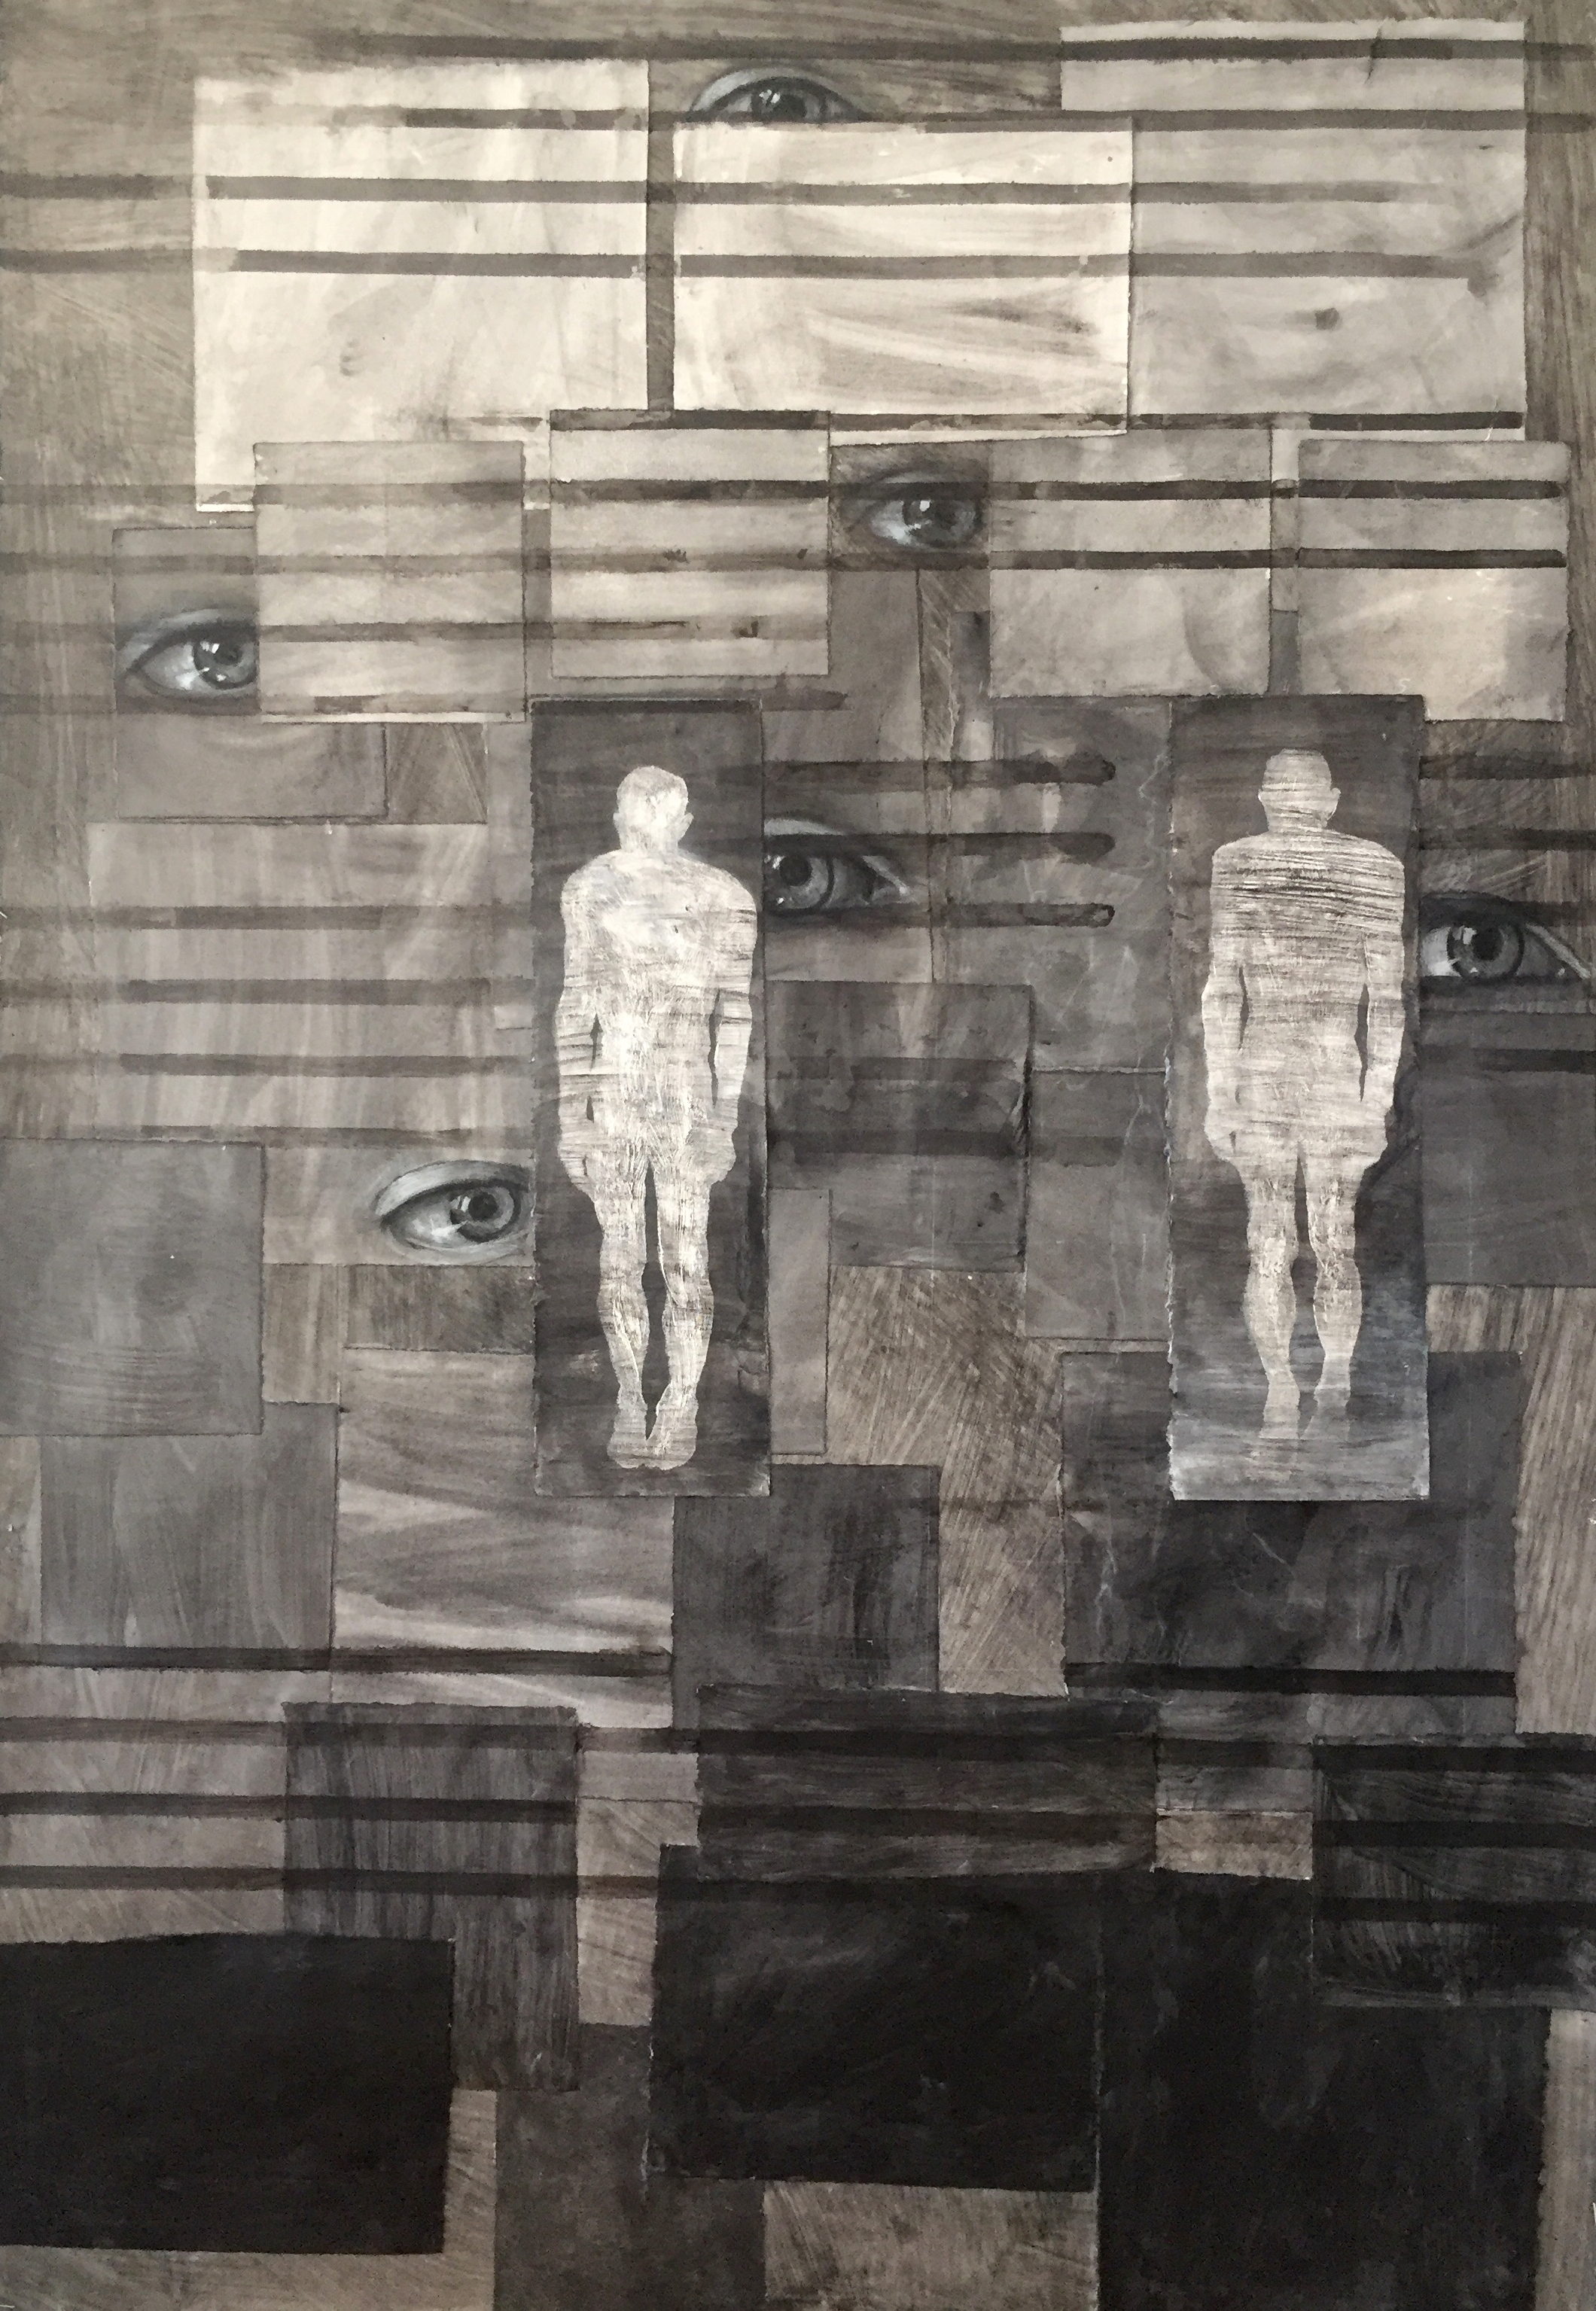 "Surveillance Series: Blinds": acrylic, charcoal, chalk on paper, 40"W x 60"H